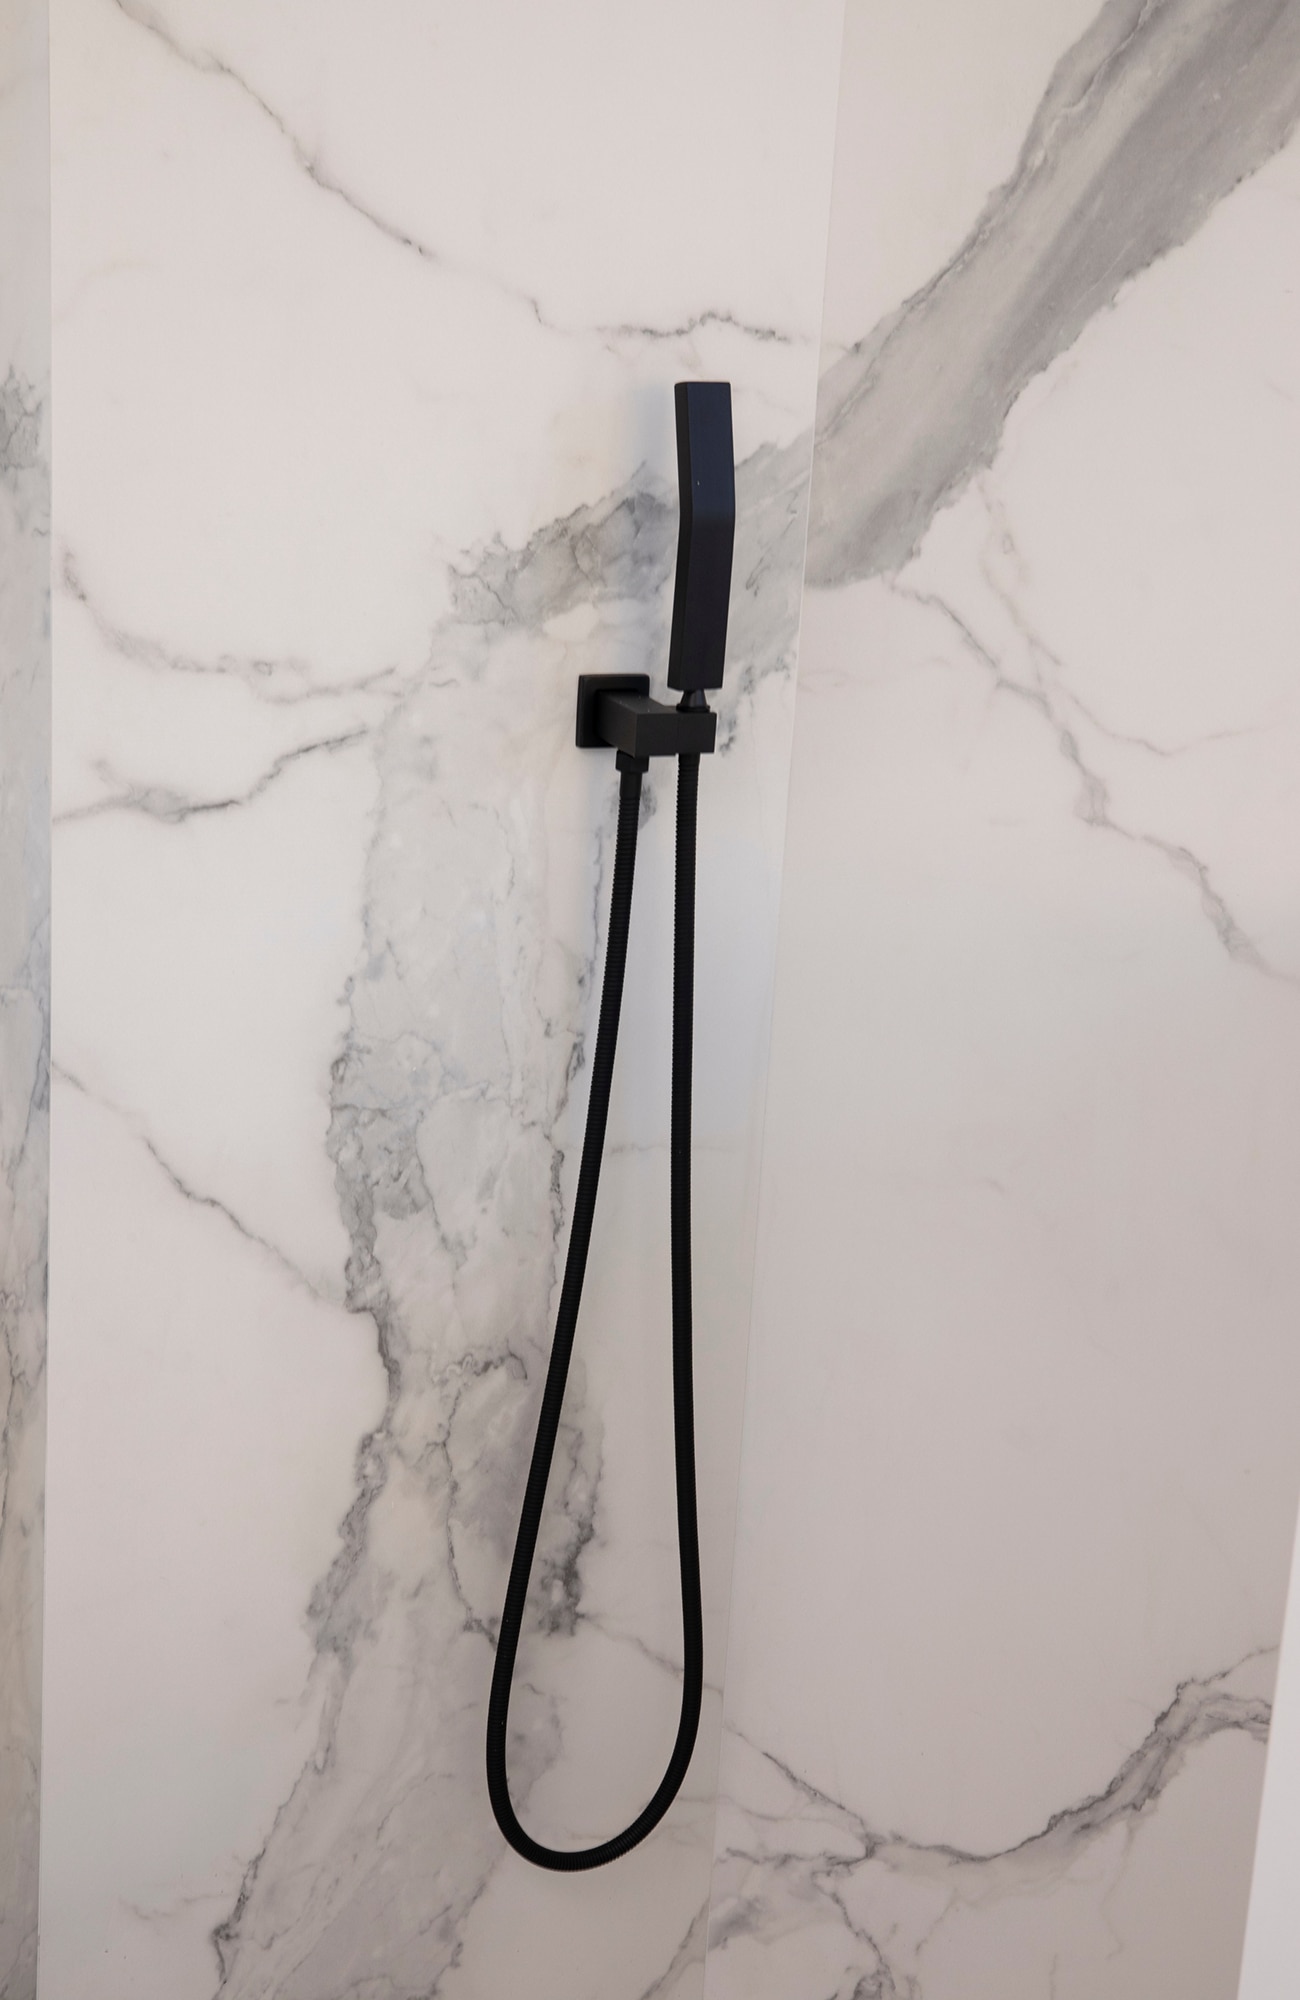 Closeup of a steam room wall with black fixtures and white with gray veining porcelain slab that looks like marble.